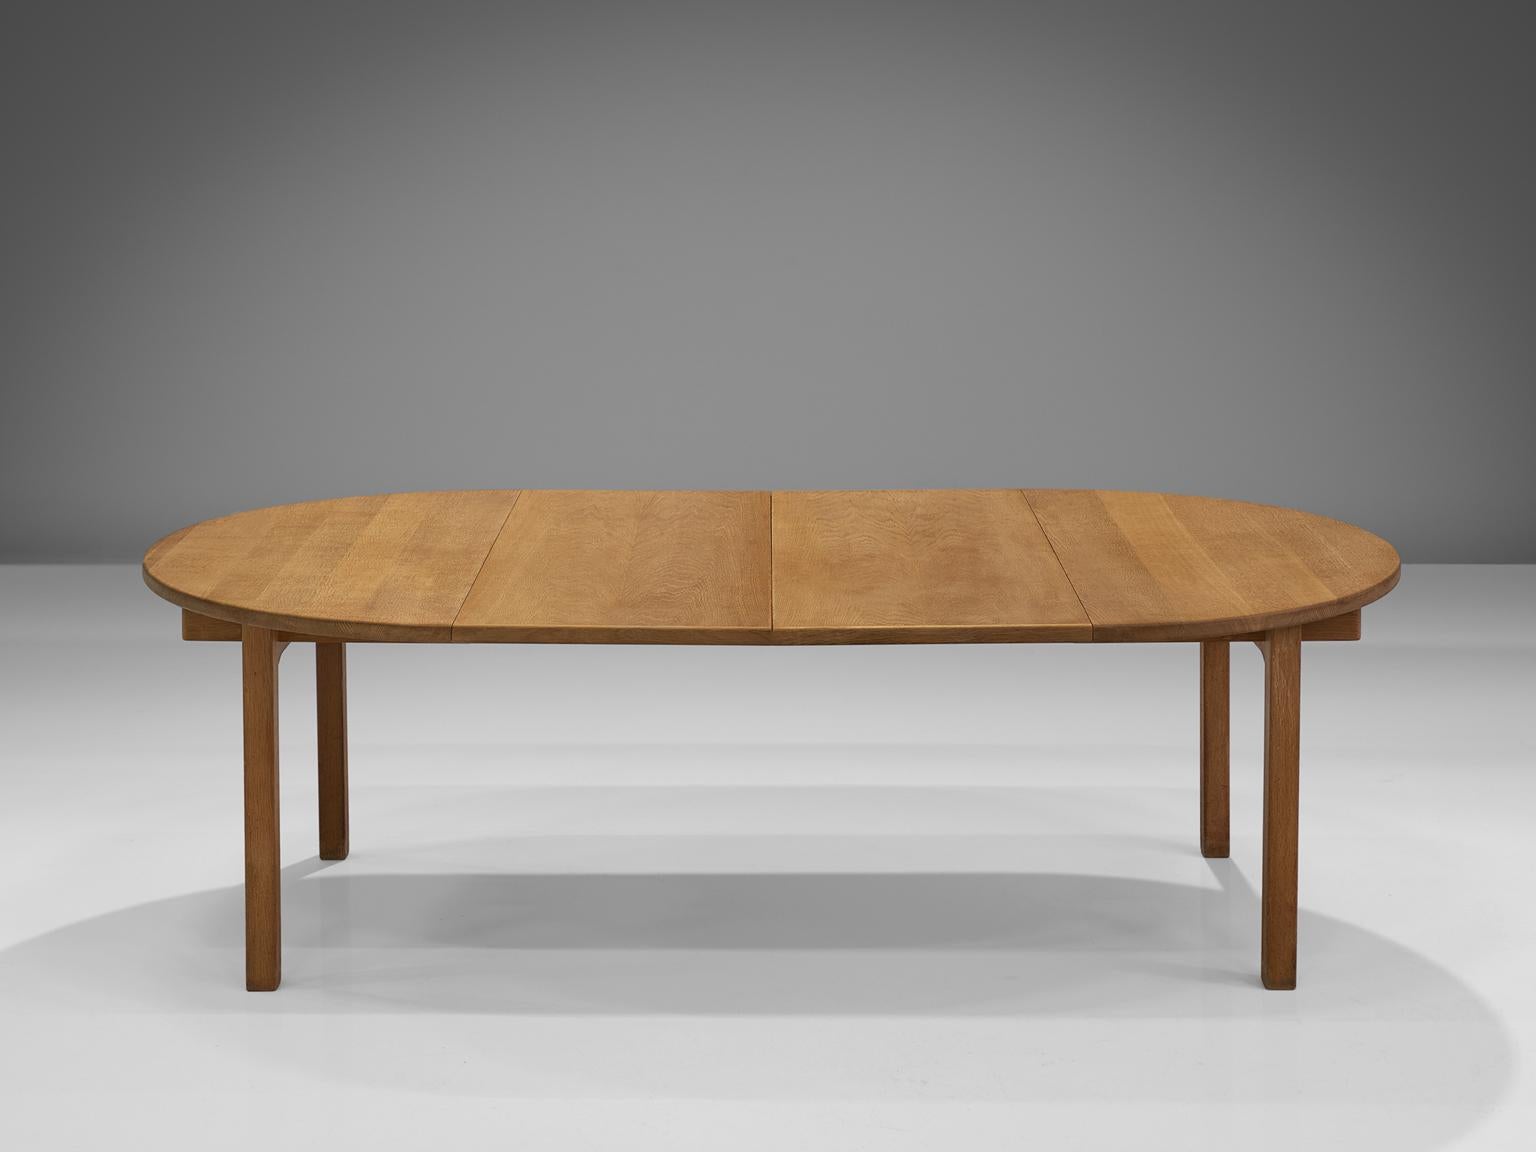 Kurt Østervig by KP Møbler, oak, Denmark, 1960s.

This extendable table in solid oak was designed in the 1960s by Kurt Østervig. The Danish design is solid, modest and well-constructed. The table can be extended or used as a circular, small